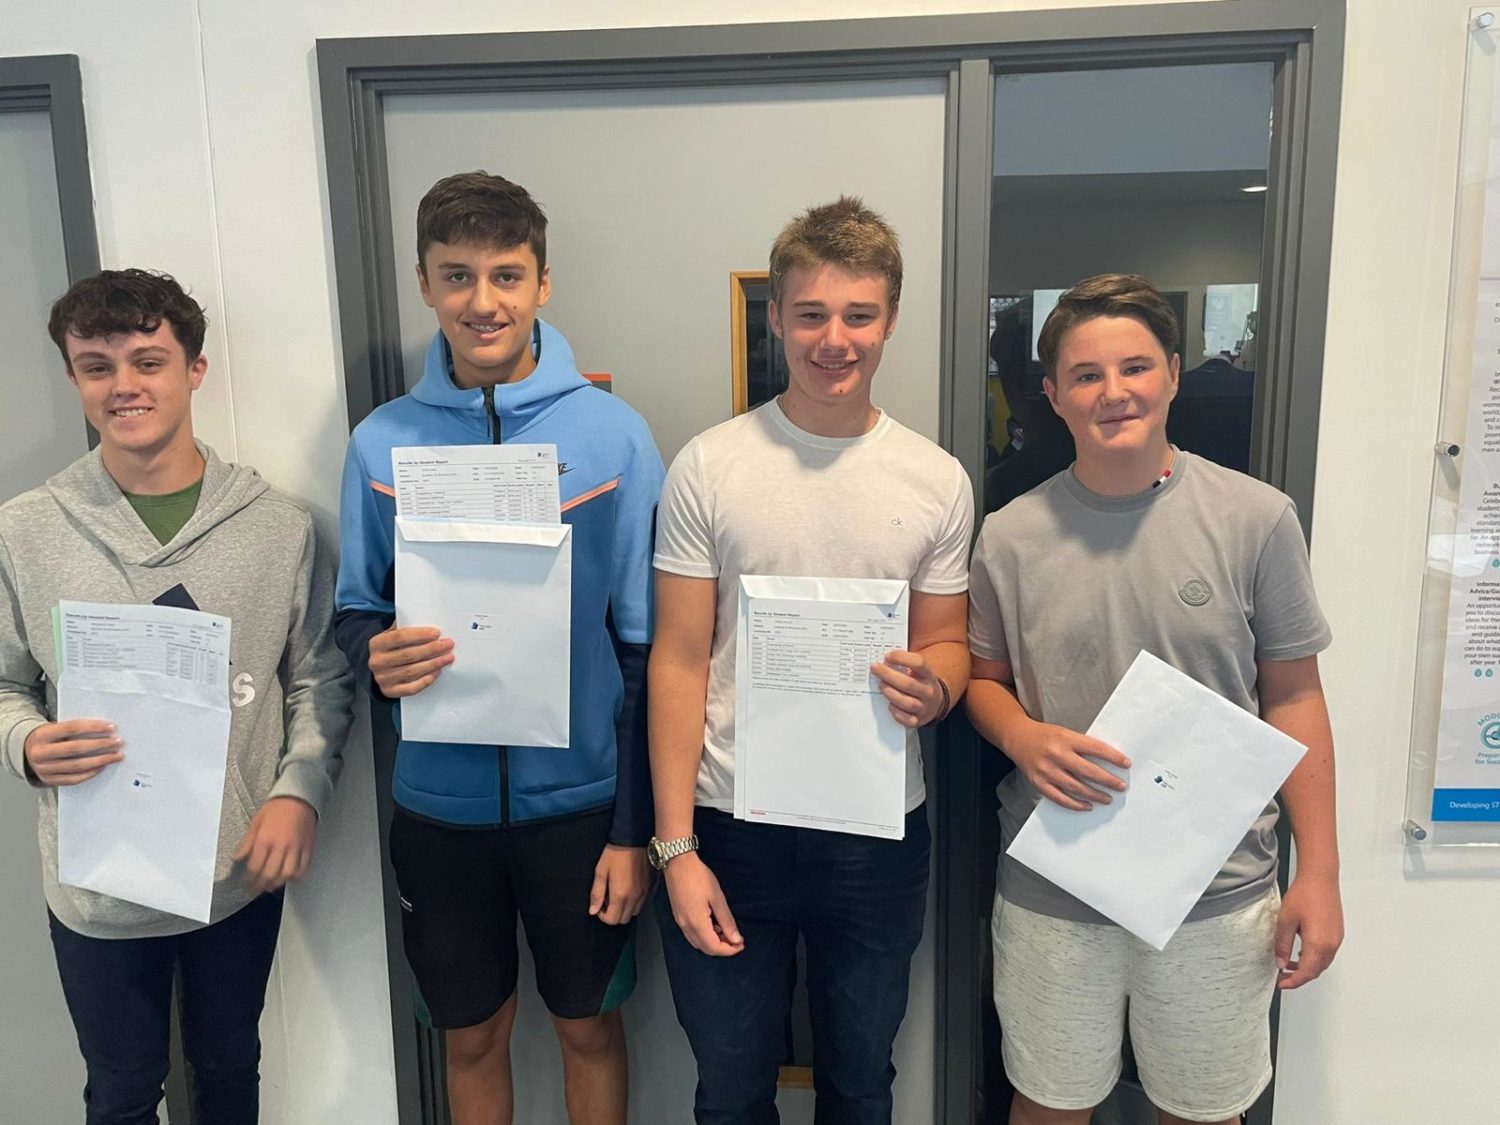 A group of students posing for a photo with their results